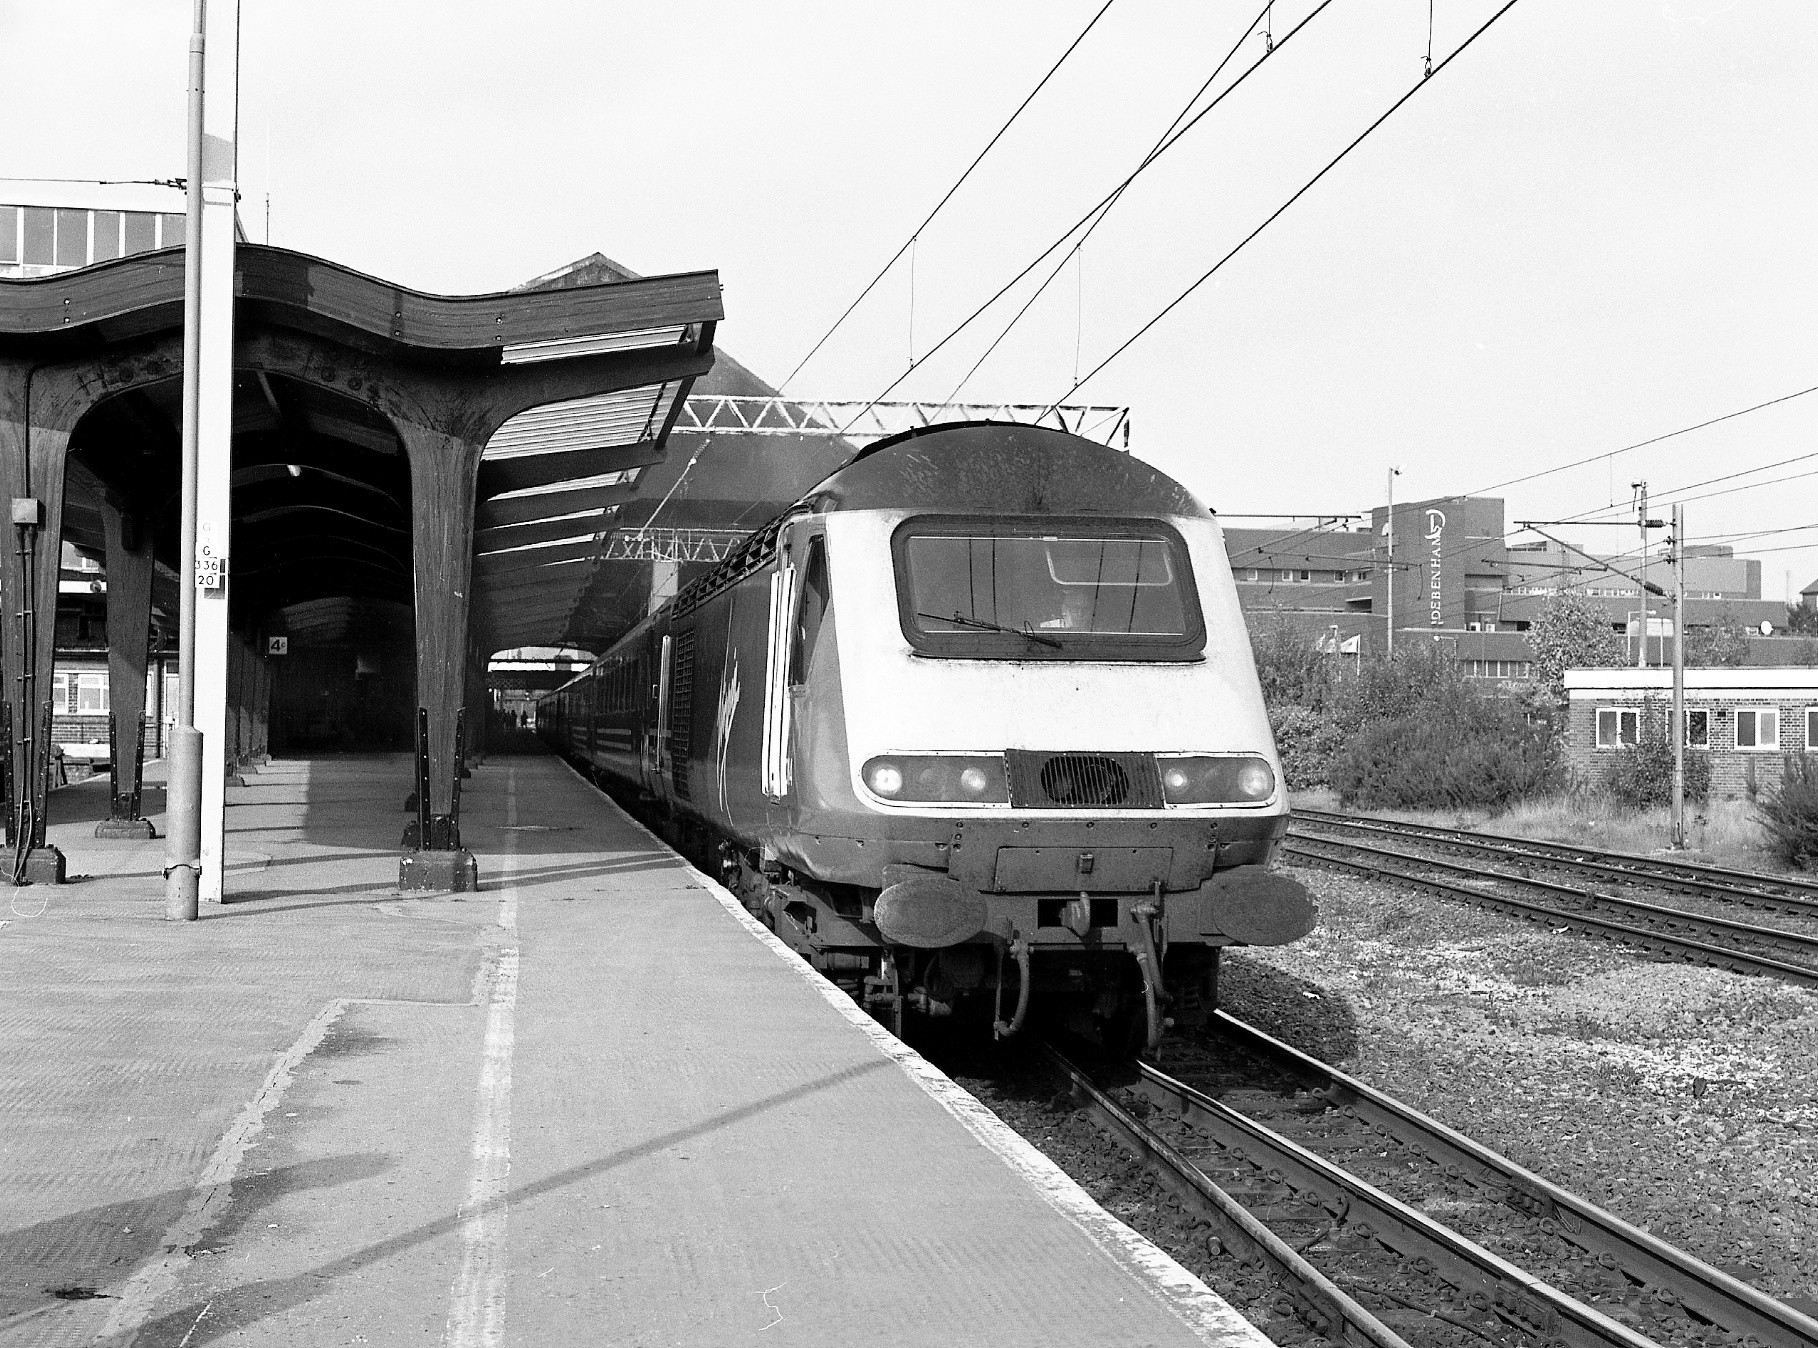 Following privatisation 43014 was assigned to Virgin Cross-Country services, between the North and the South West – duties which it carried out in the days of British Railways. Operating in the southerly direction on the west coast mainline the locomotive is pictured whilst making an obligatory stop at Preston on 16th October 1999. Bob Green